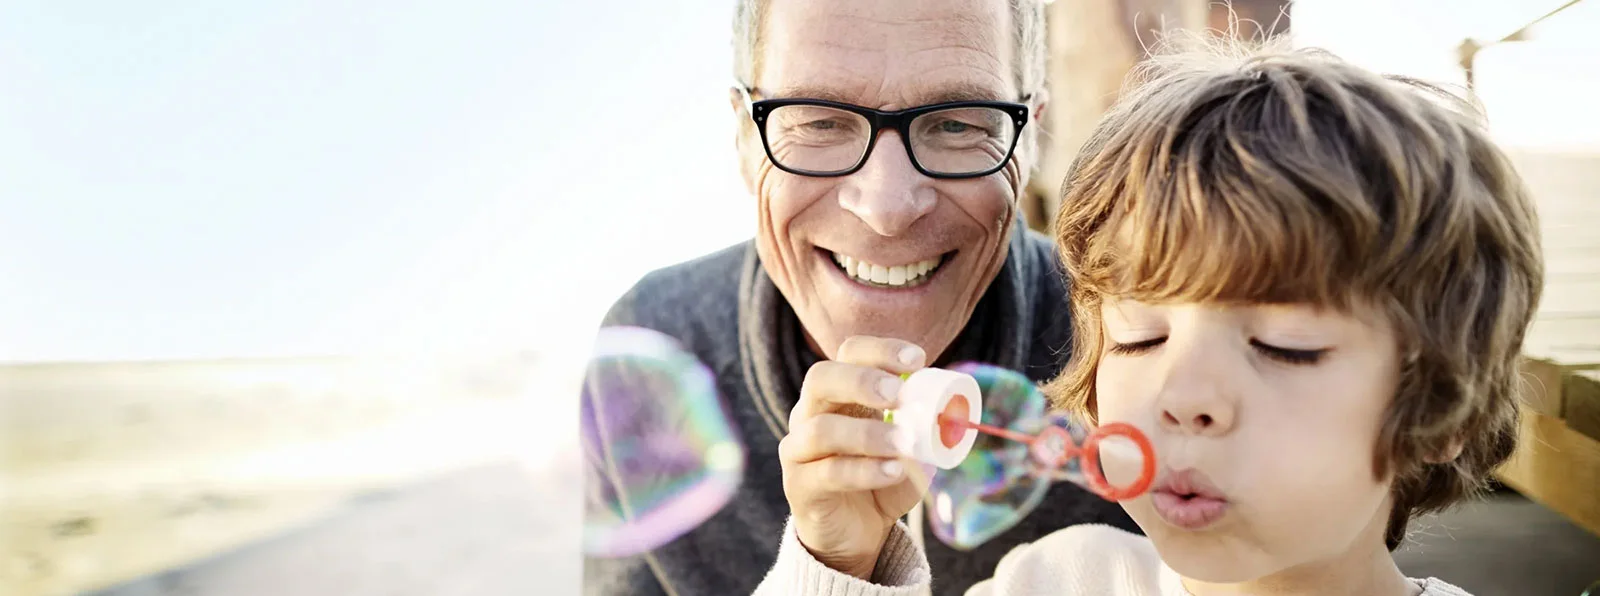 child blowing bubbles with older man